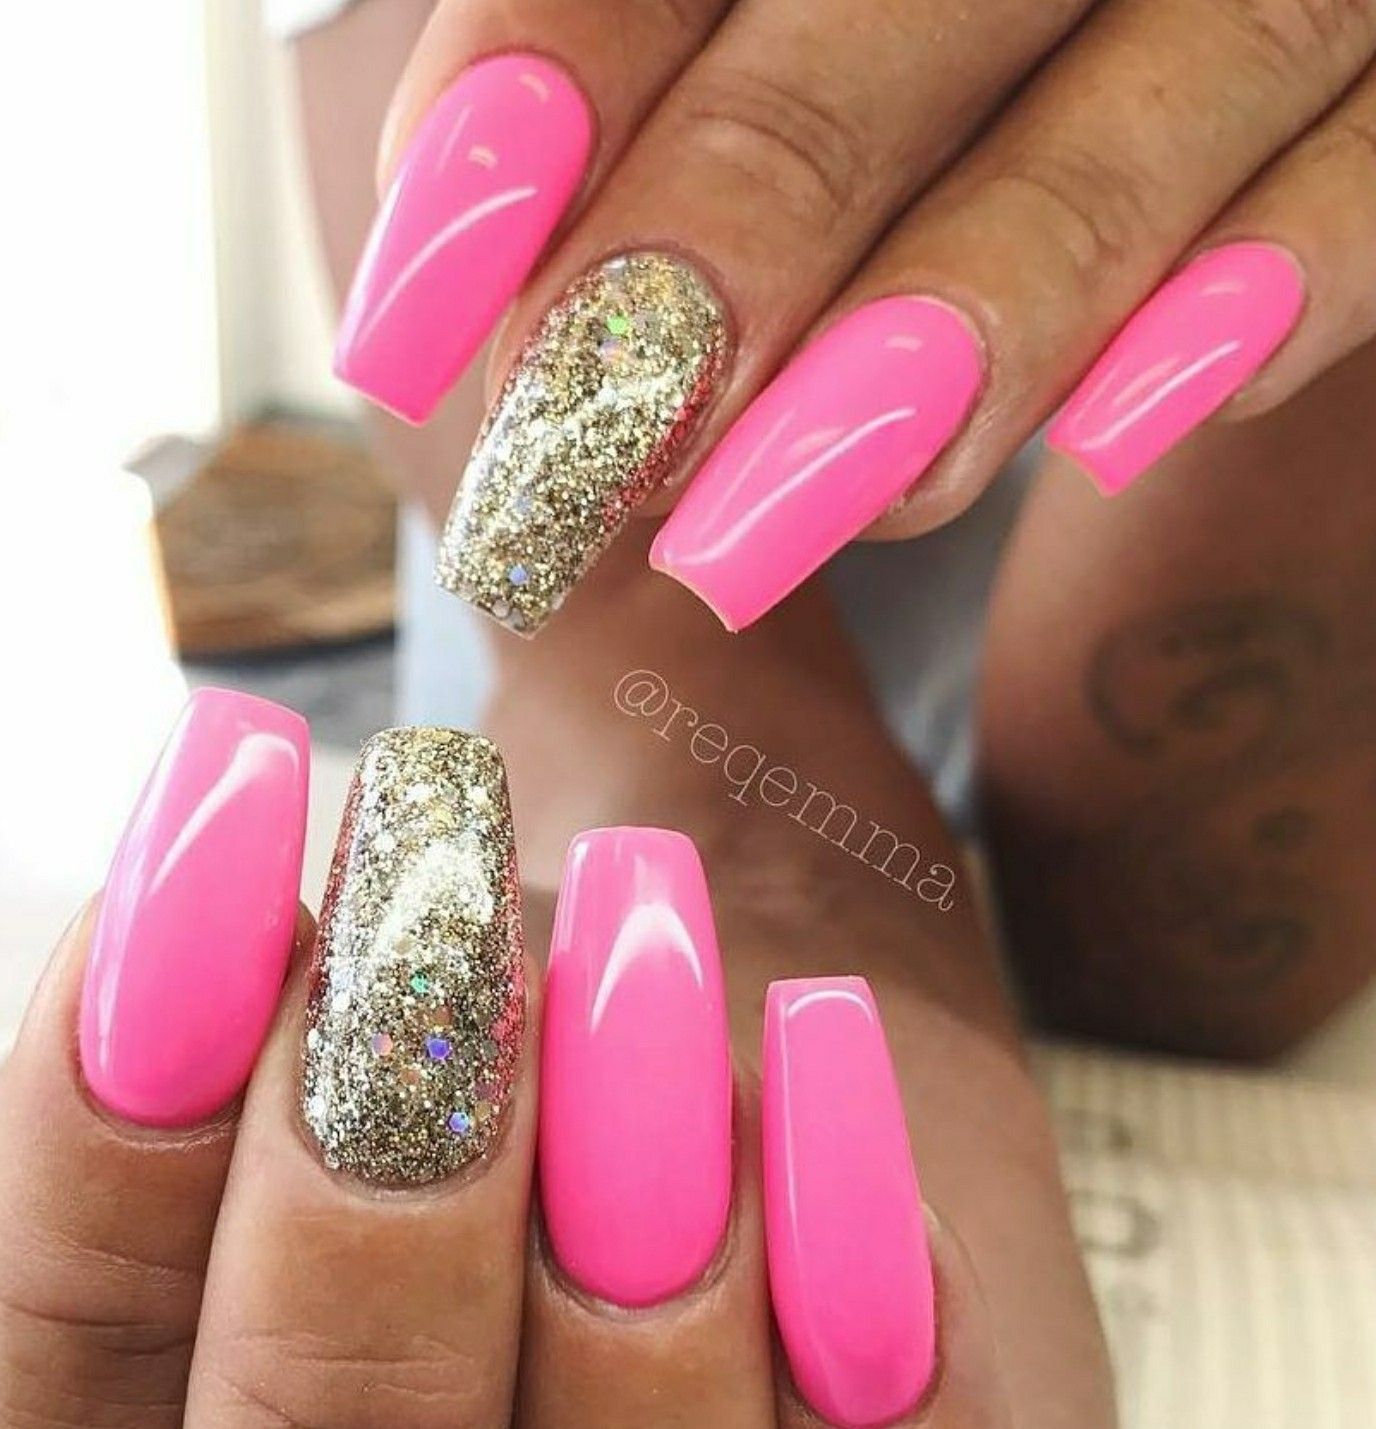 Tapered Square Nails Square Nails Pink And Gold Nails Pink Nails Gold Nails Gel Nails Acrylic Nails Nehty